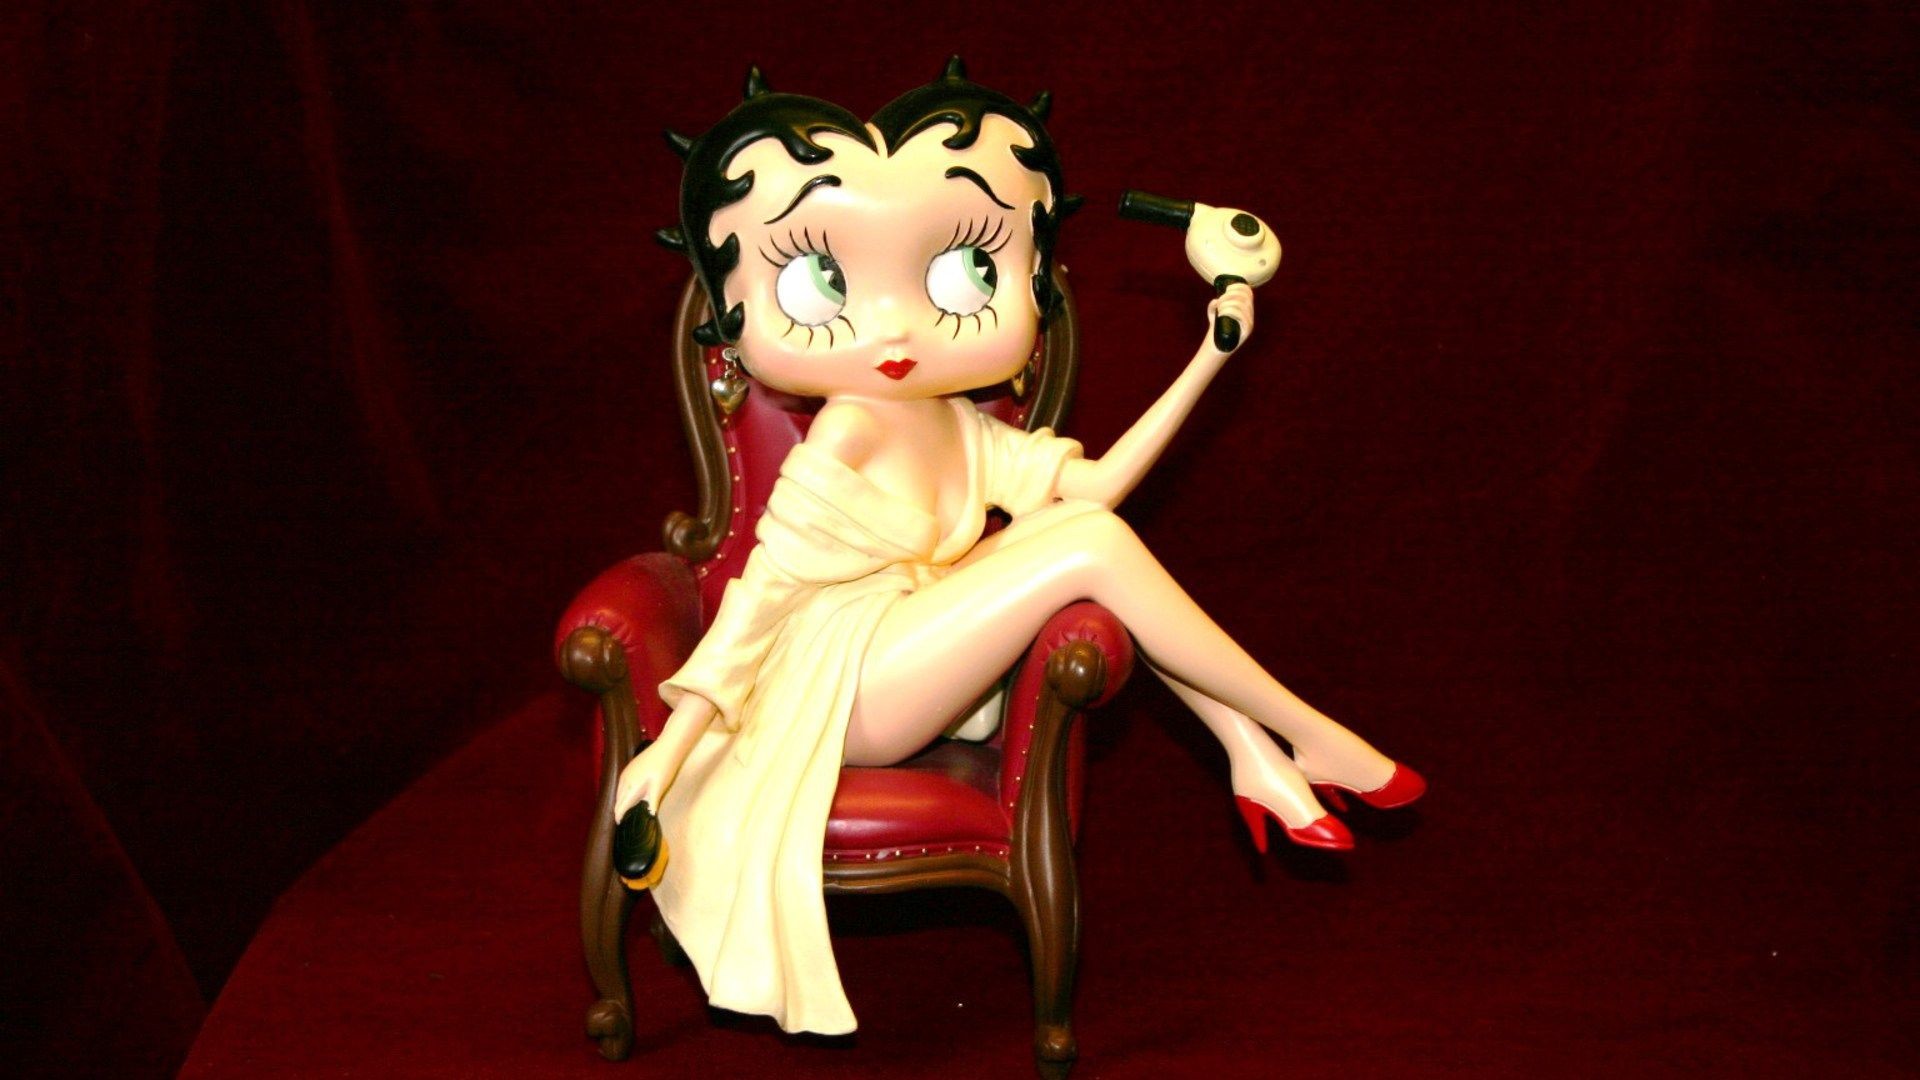 1920x1080 Betty Boop Wallpaper http://wallpapers-and-backgrounds.net/betty